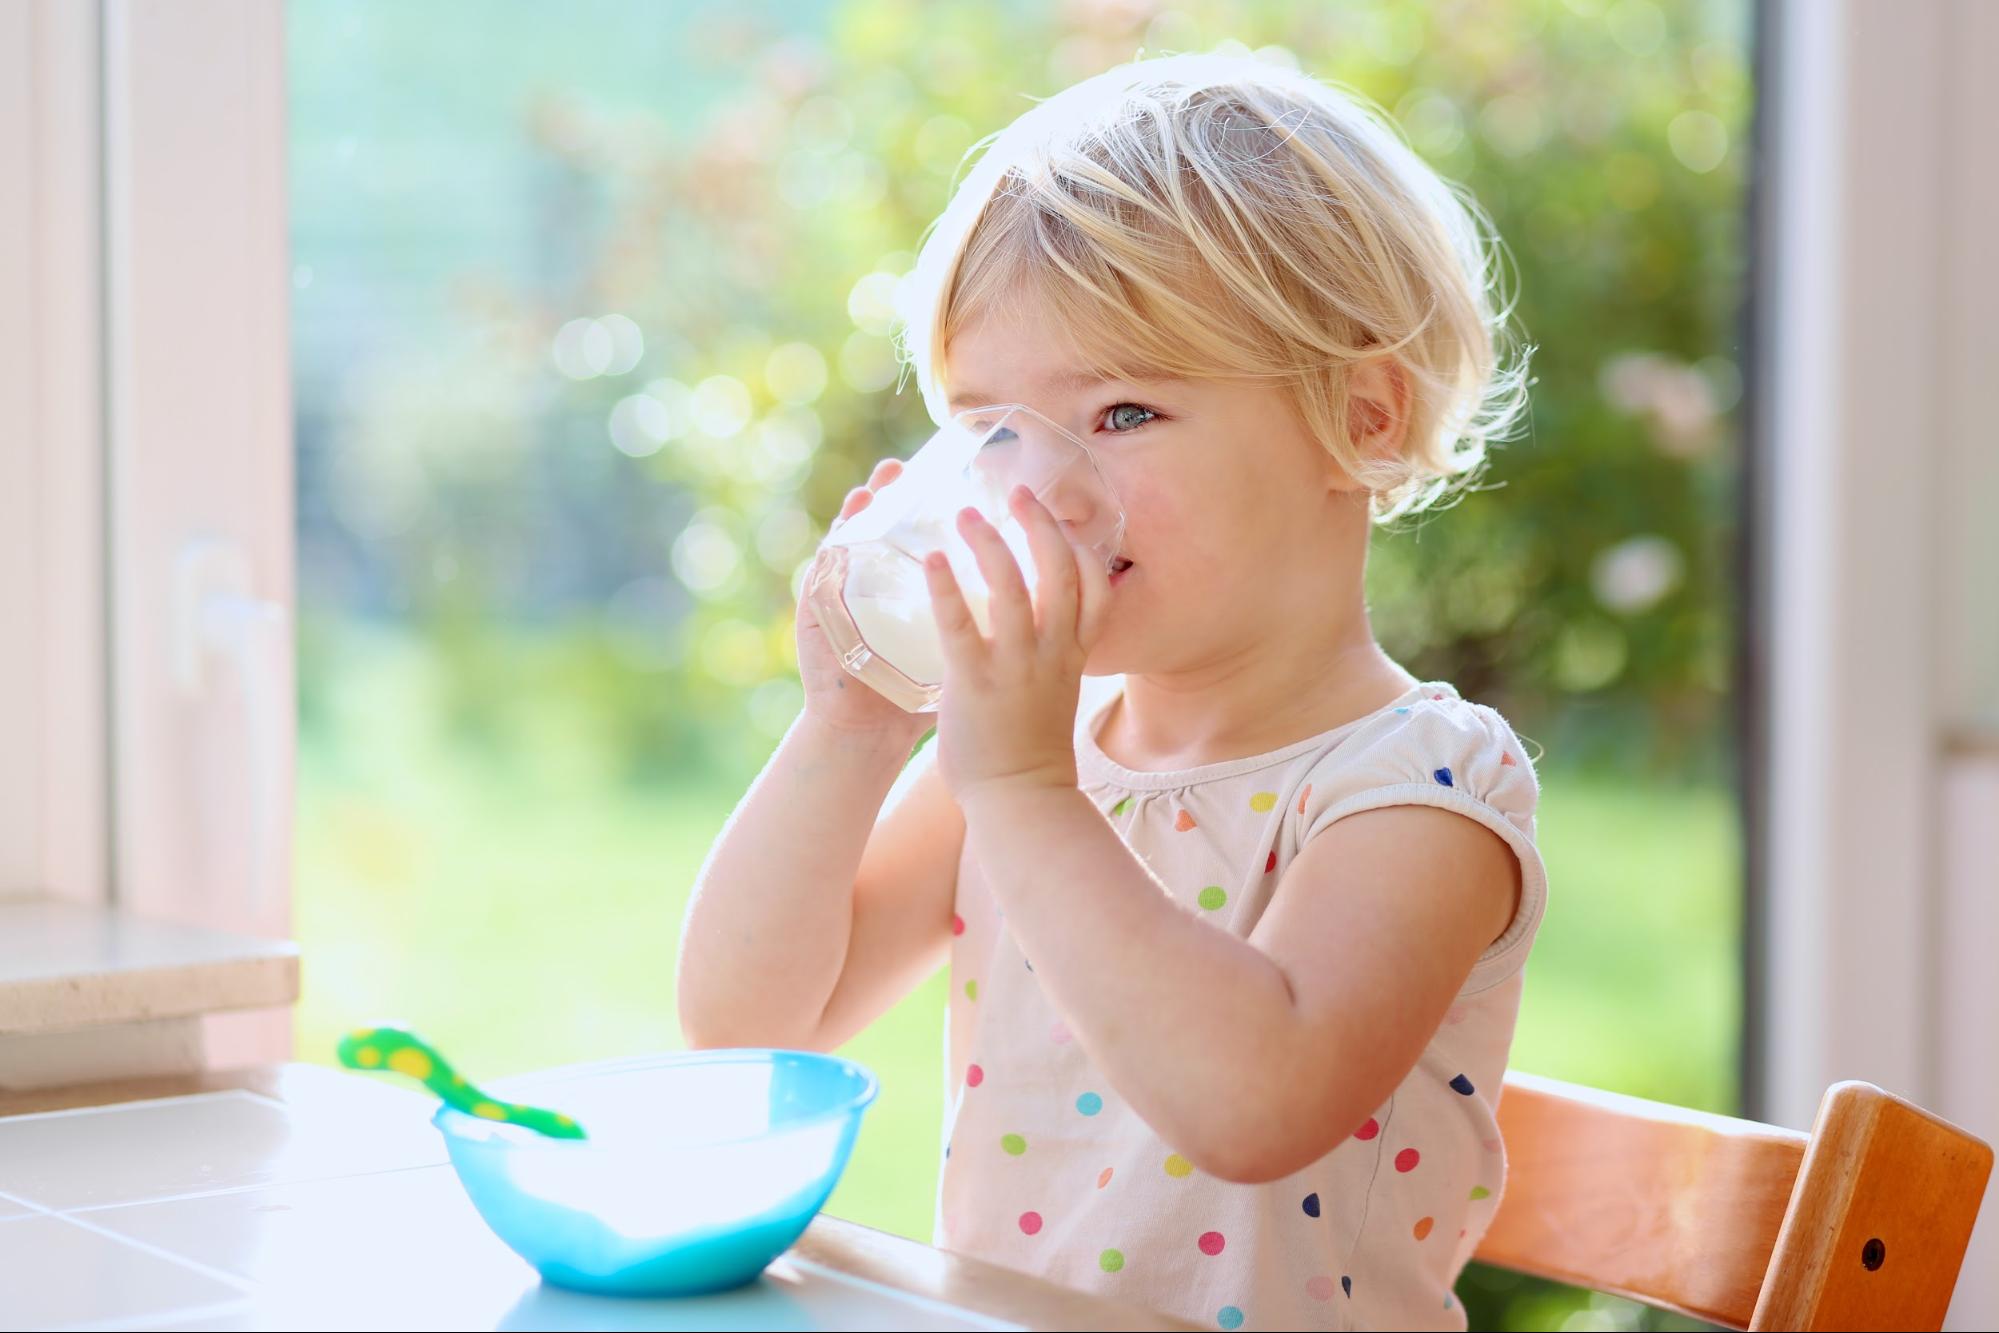 A young child enjoys a glass of milk.